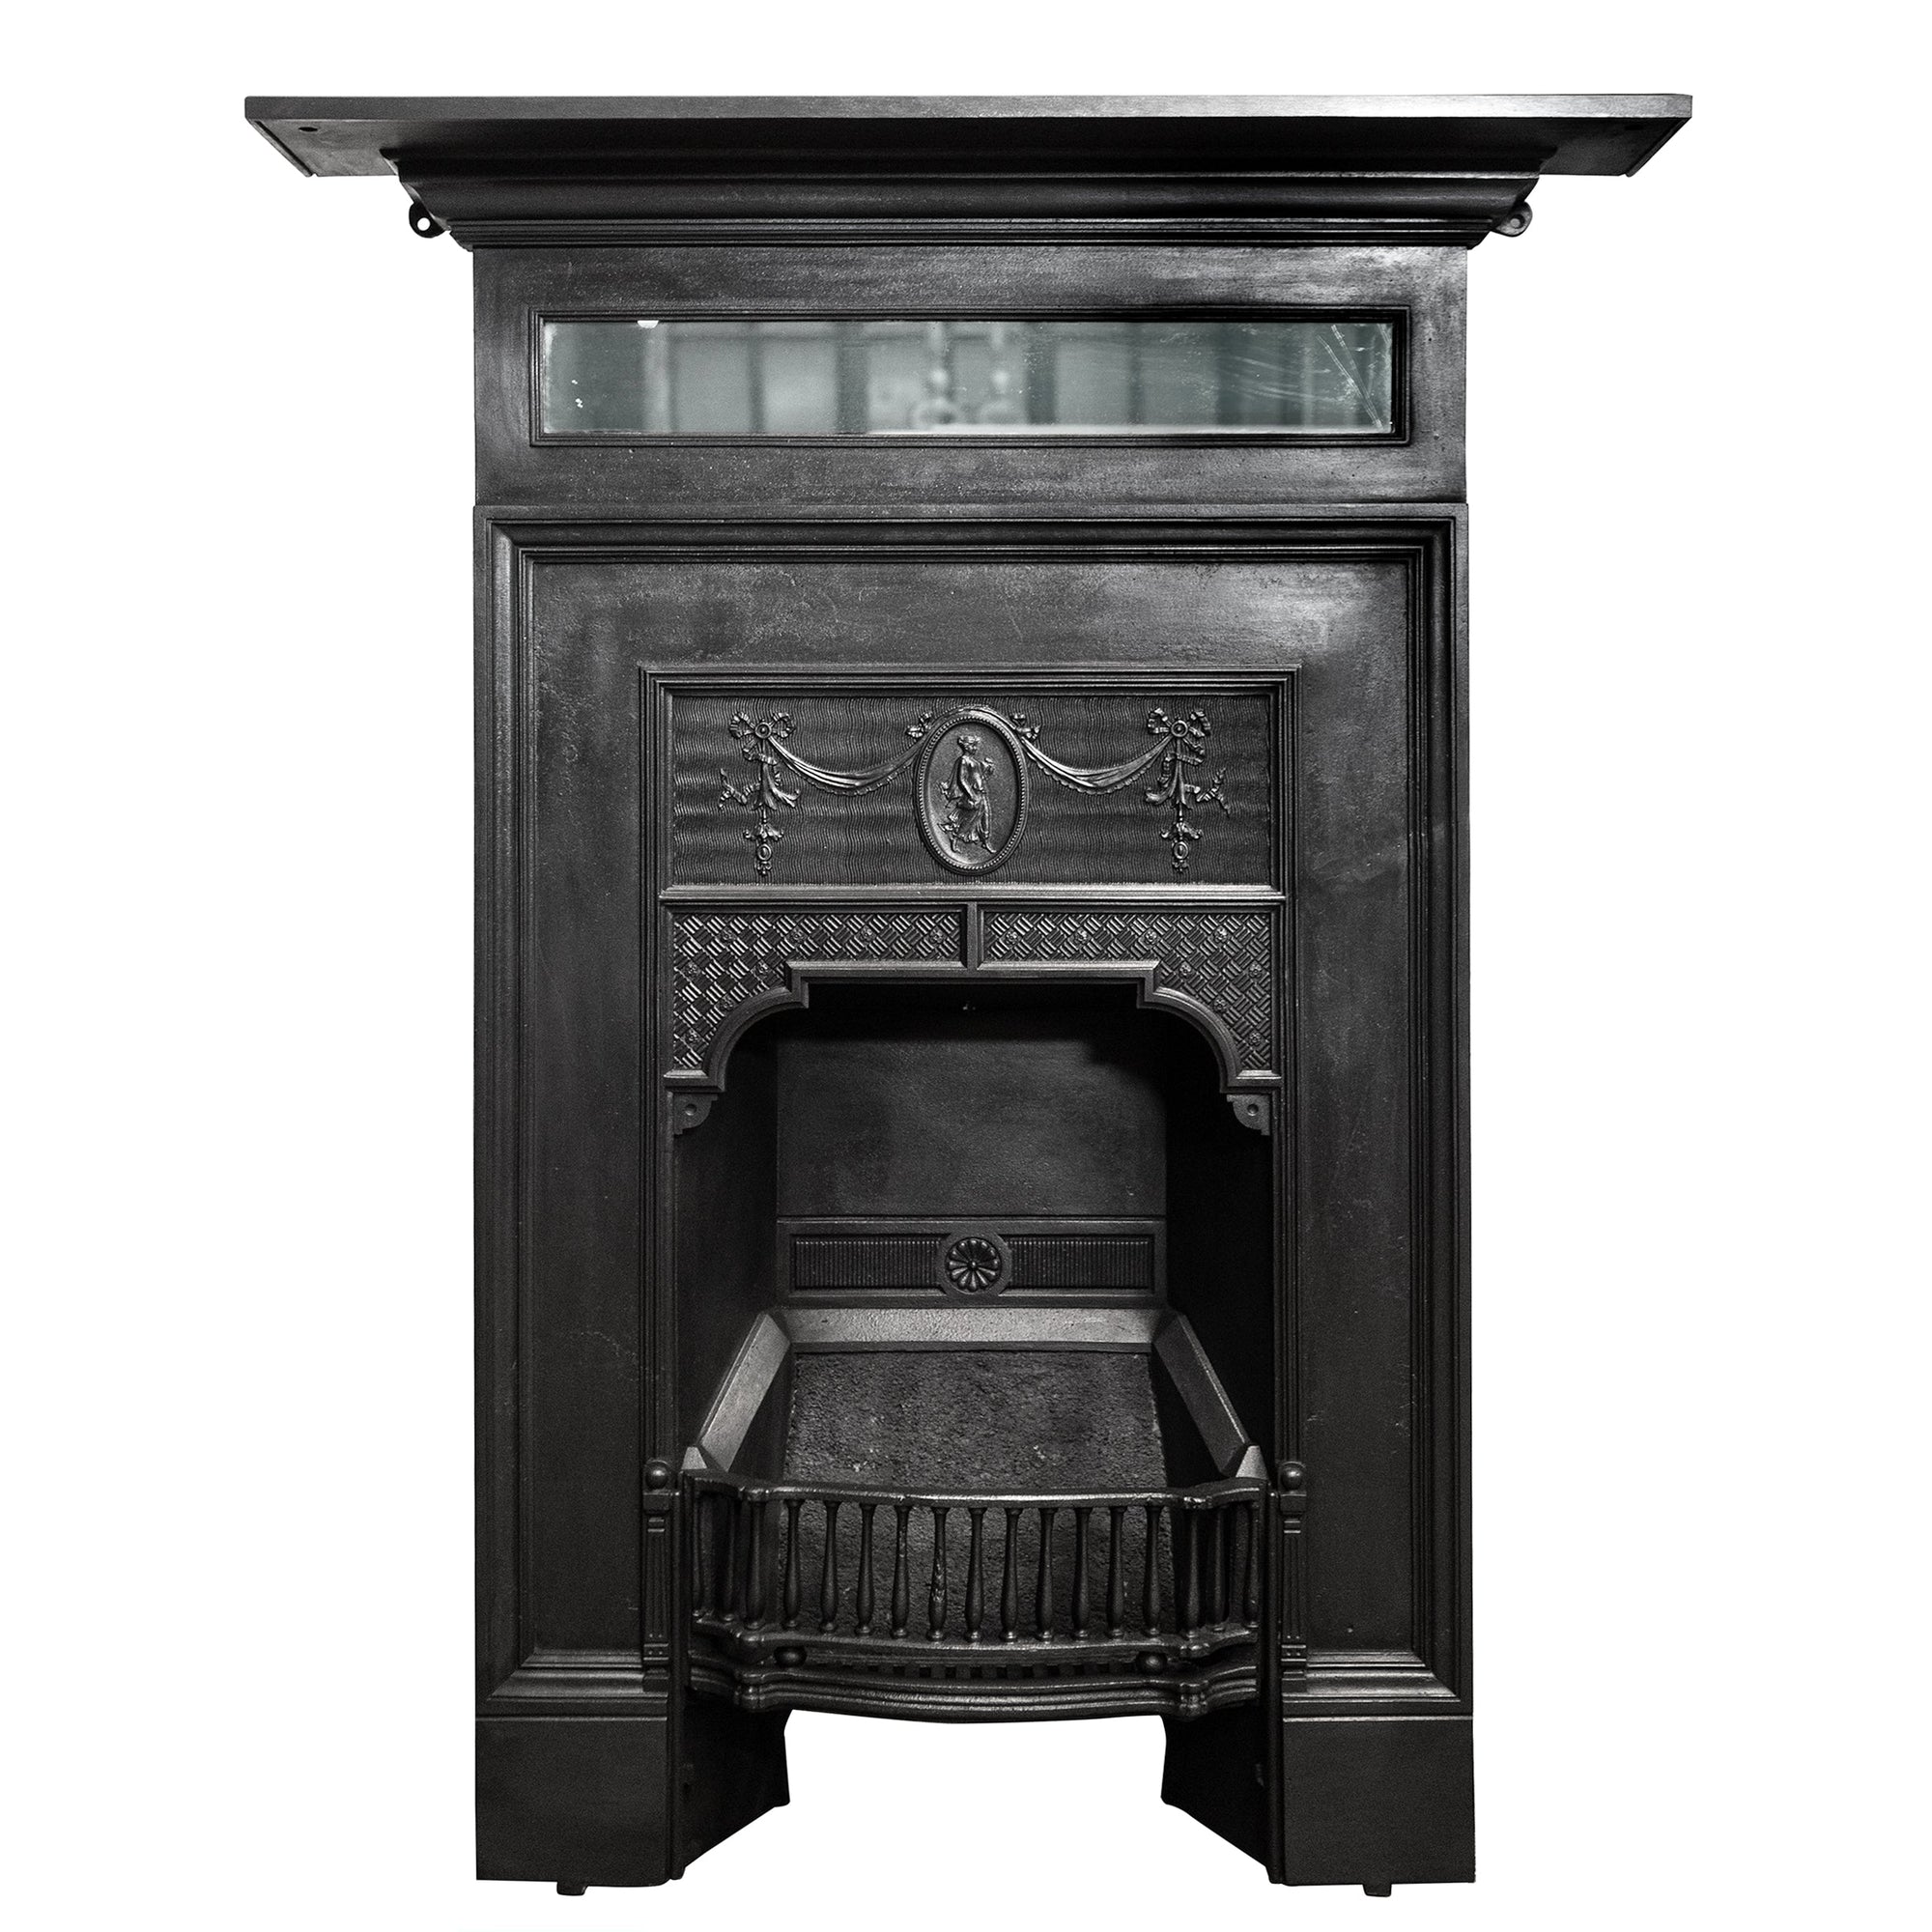 Antique Mirrored Cast Iron Combination Fireplace | The Architectural Forum